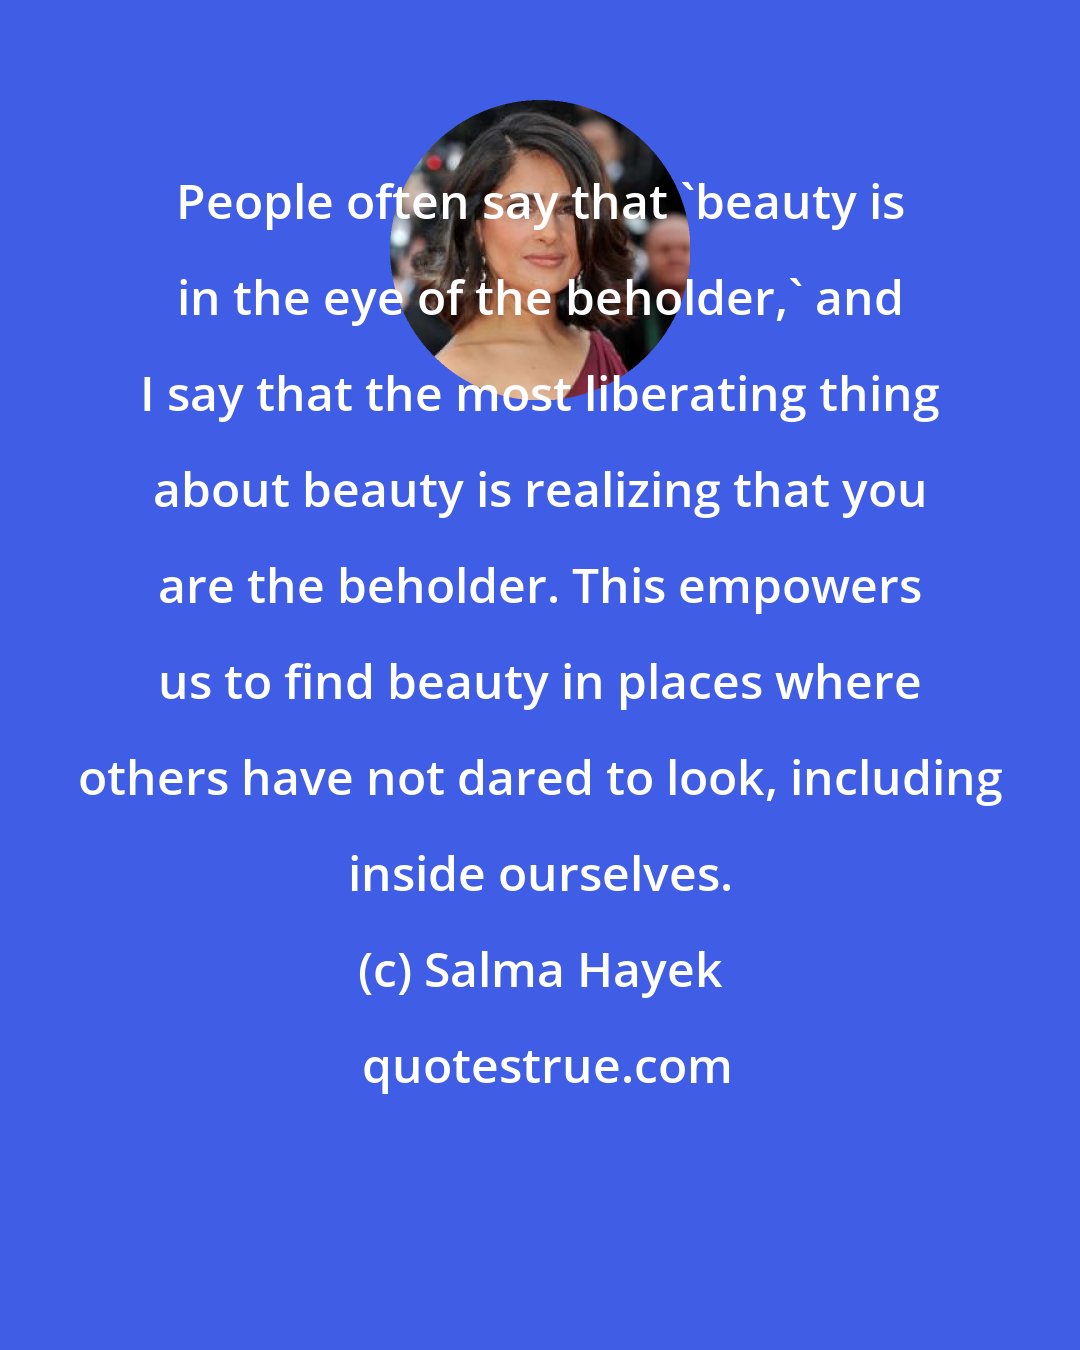 Salma Hayek: People often say that 'beauty is in the eye of the beholder,' and I say that the most liberating thing about beauty is realizing that you are the beholder. This empowers us to find beauty in places where others have not dared to look, including inside ourselves.